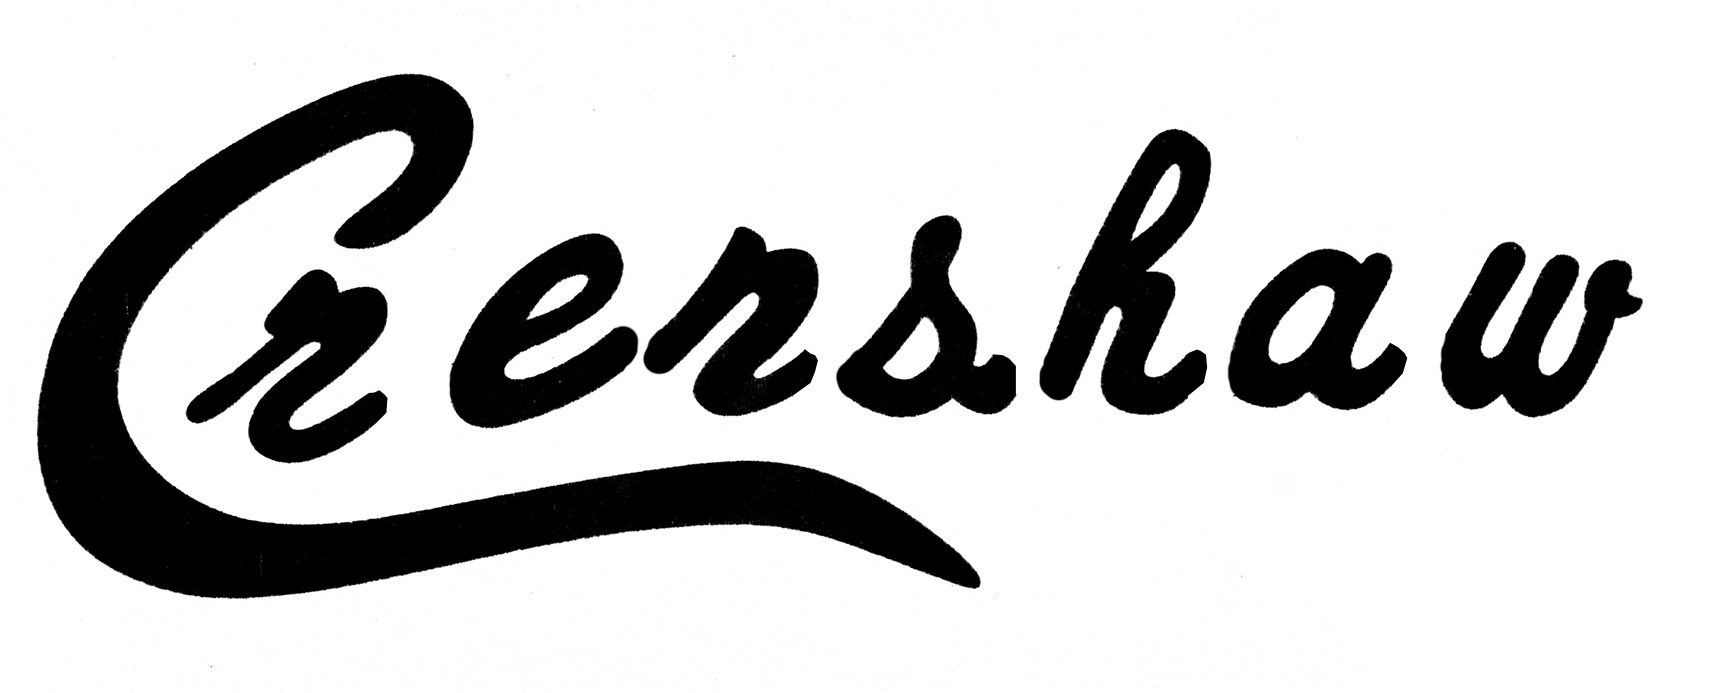 Looking for a similar script font, especially the lowercase 